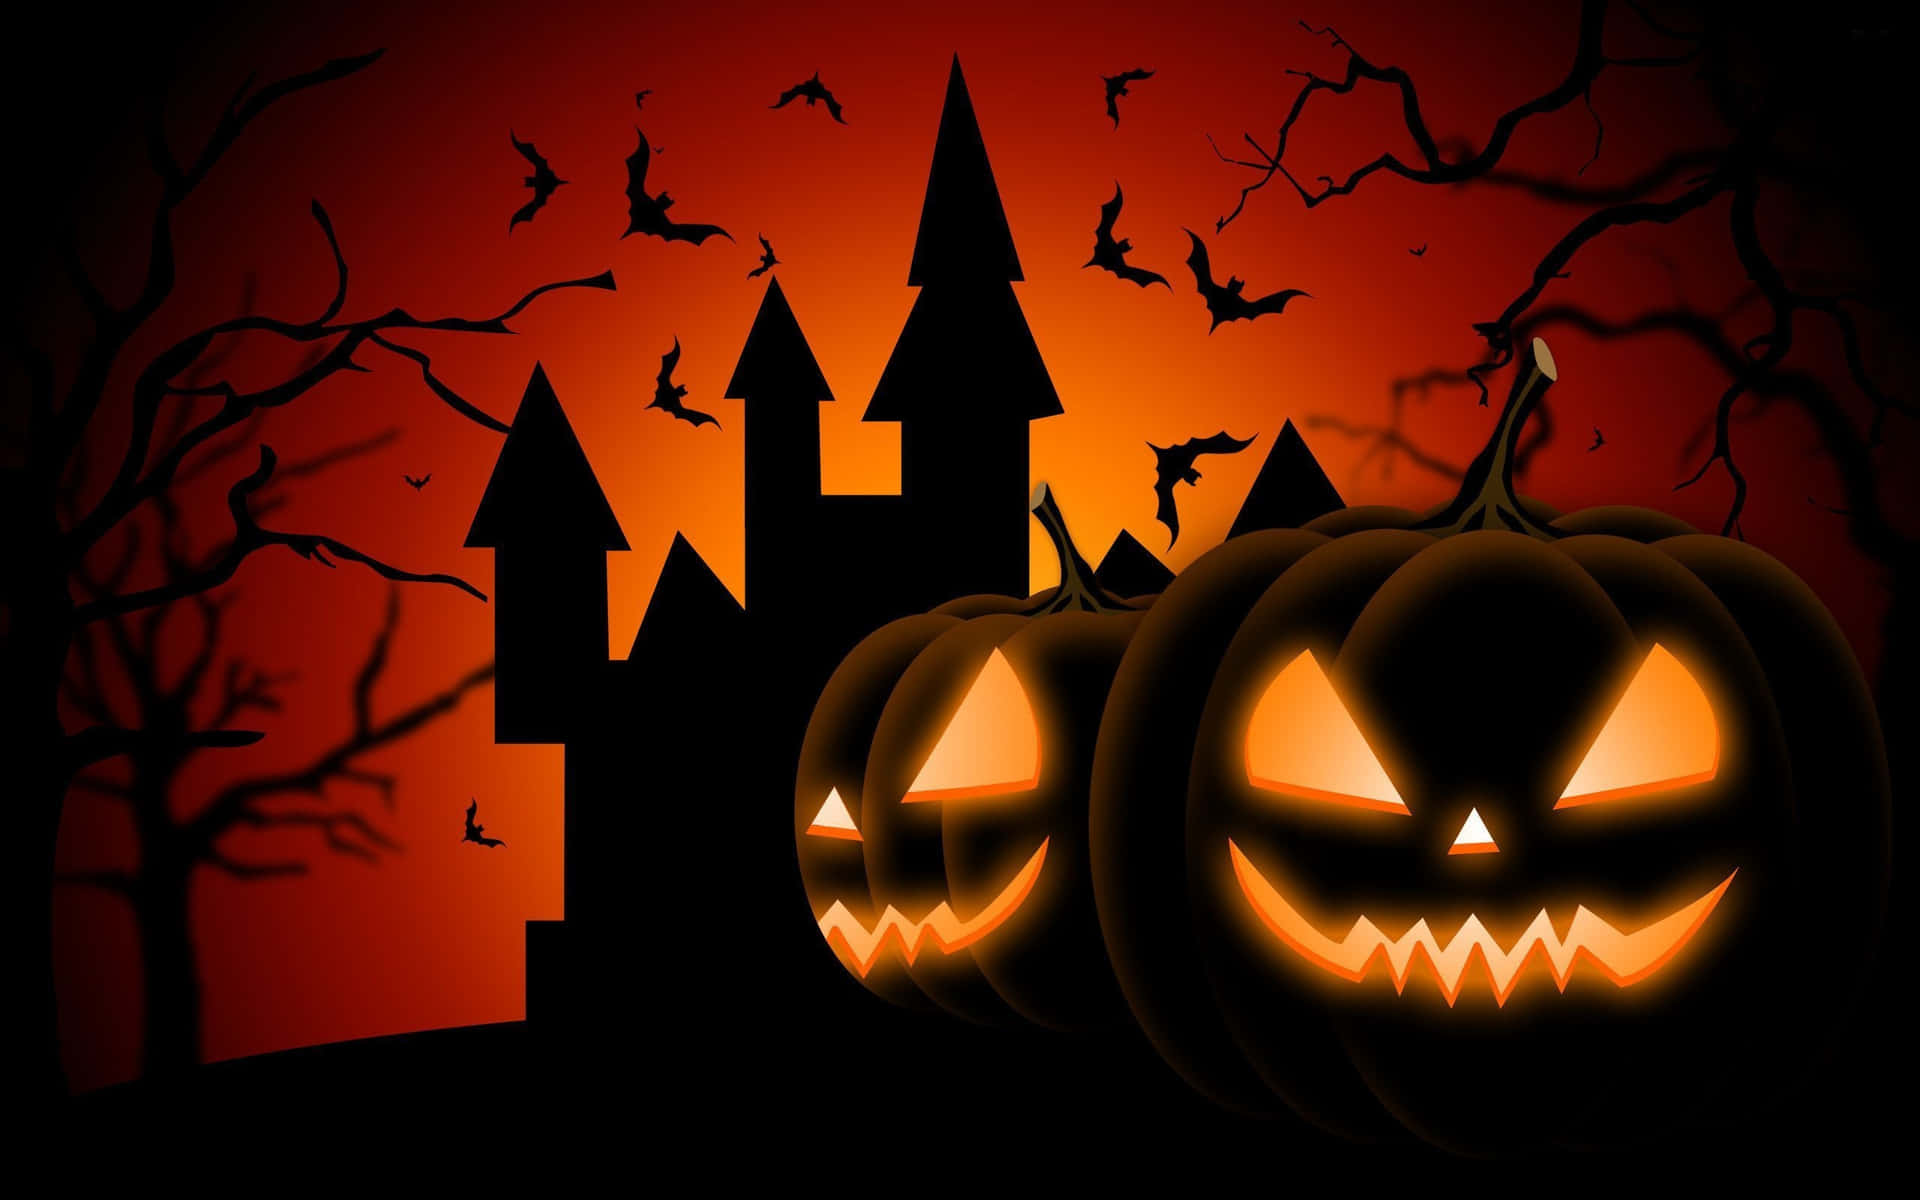 Get Ready For A Spooky Trick-r-treat Night! Background